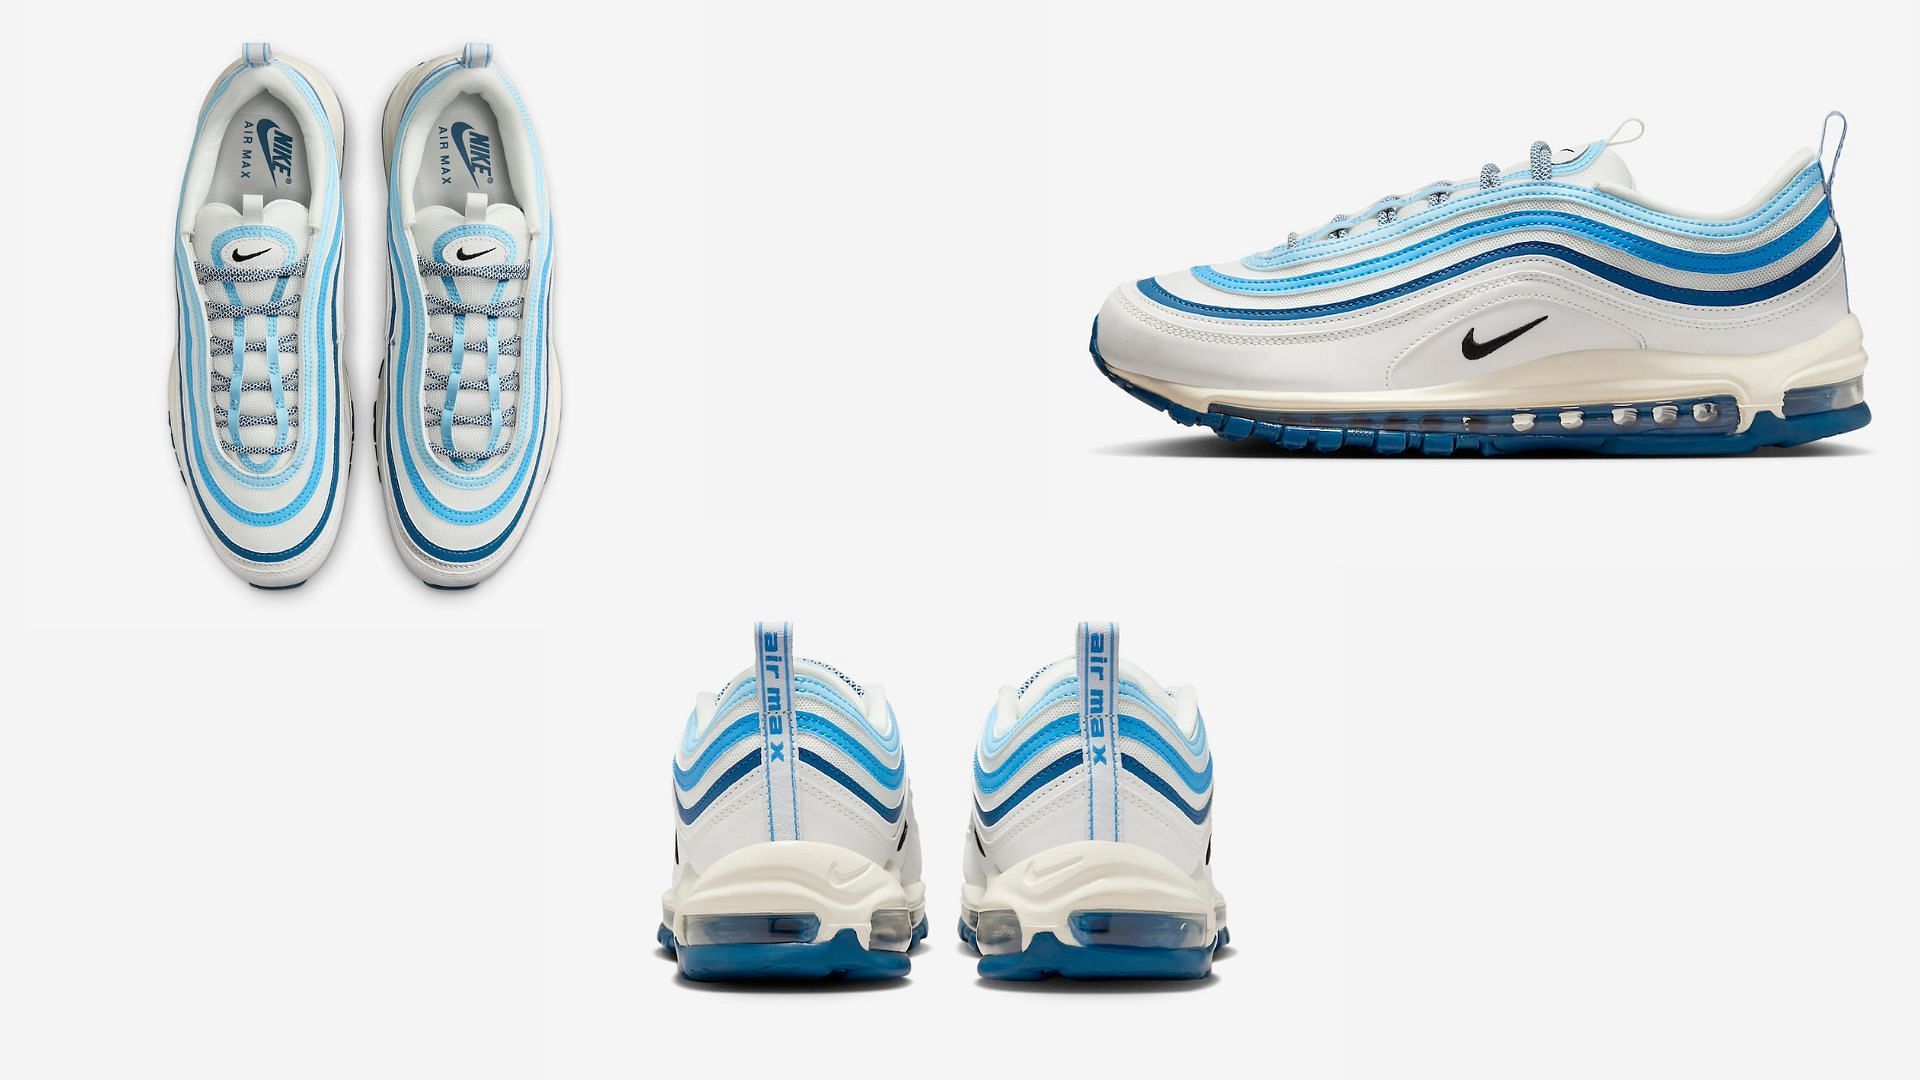 A closer look at the Nike Air Max 97 Glacier Blue sneakers (Image via YouTube/@sneakersociety)